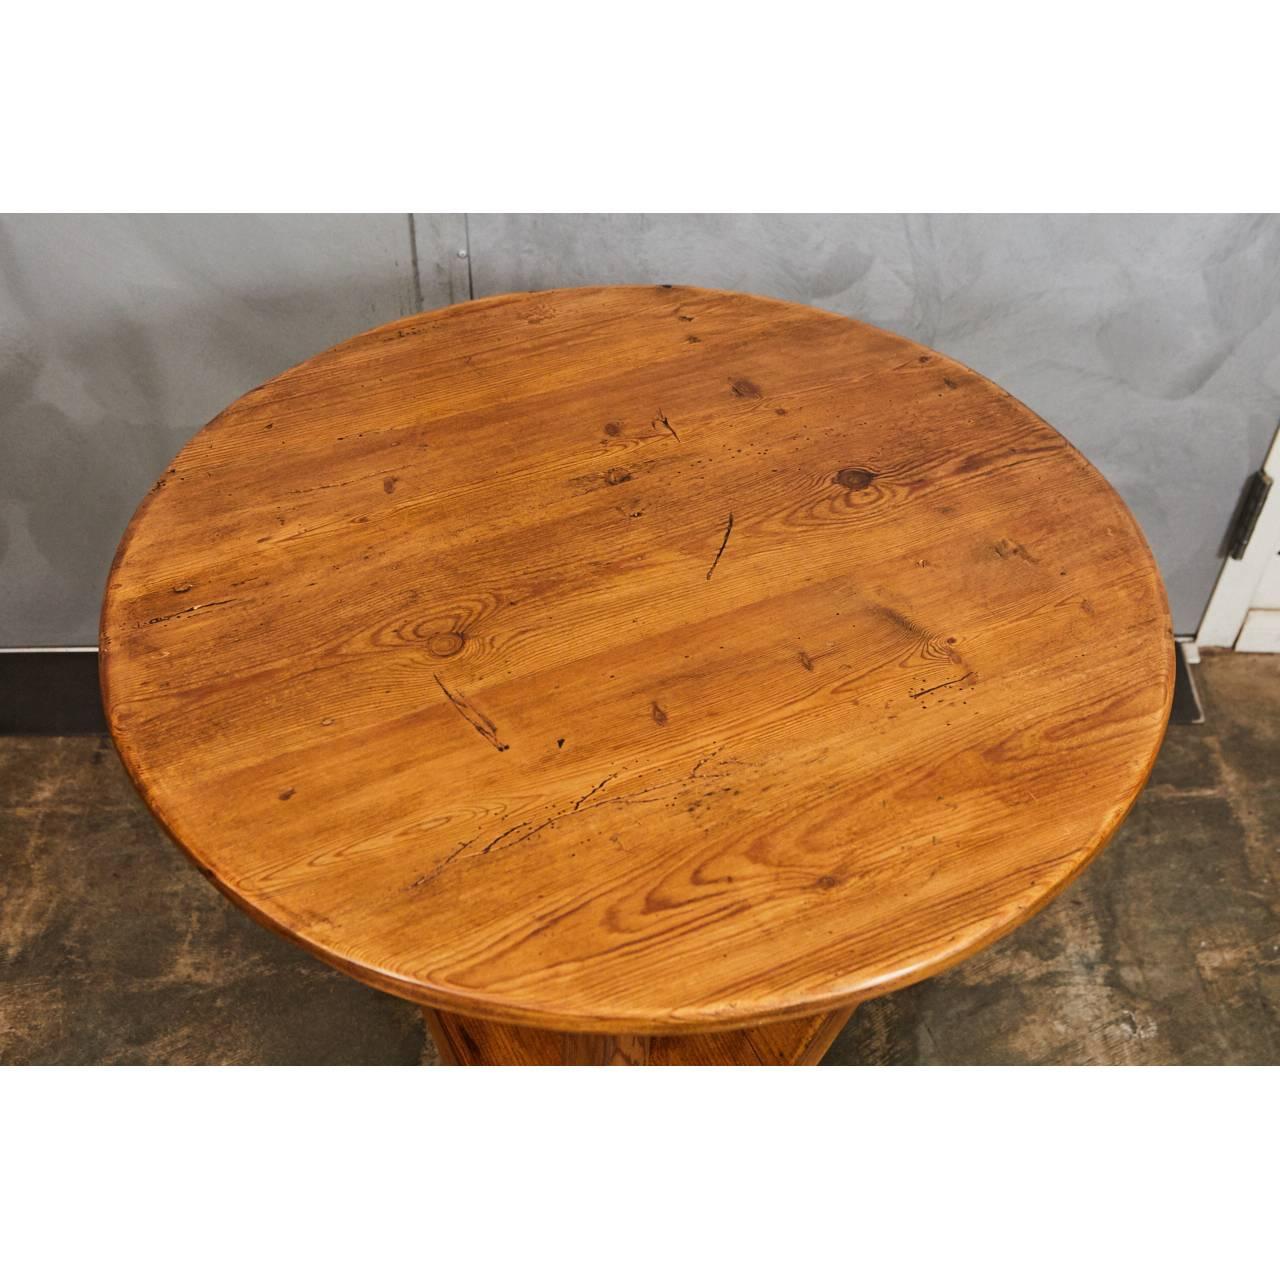 This nicely crafted cricket table has a nice color with original signs of age and use. The legs are three sided. These tables were used on the cricket fields for their light, sturdy construction and are popular to this day for a variety of